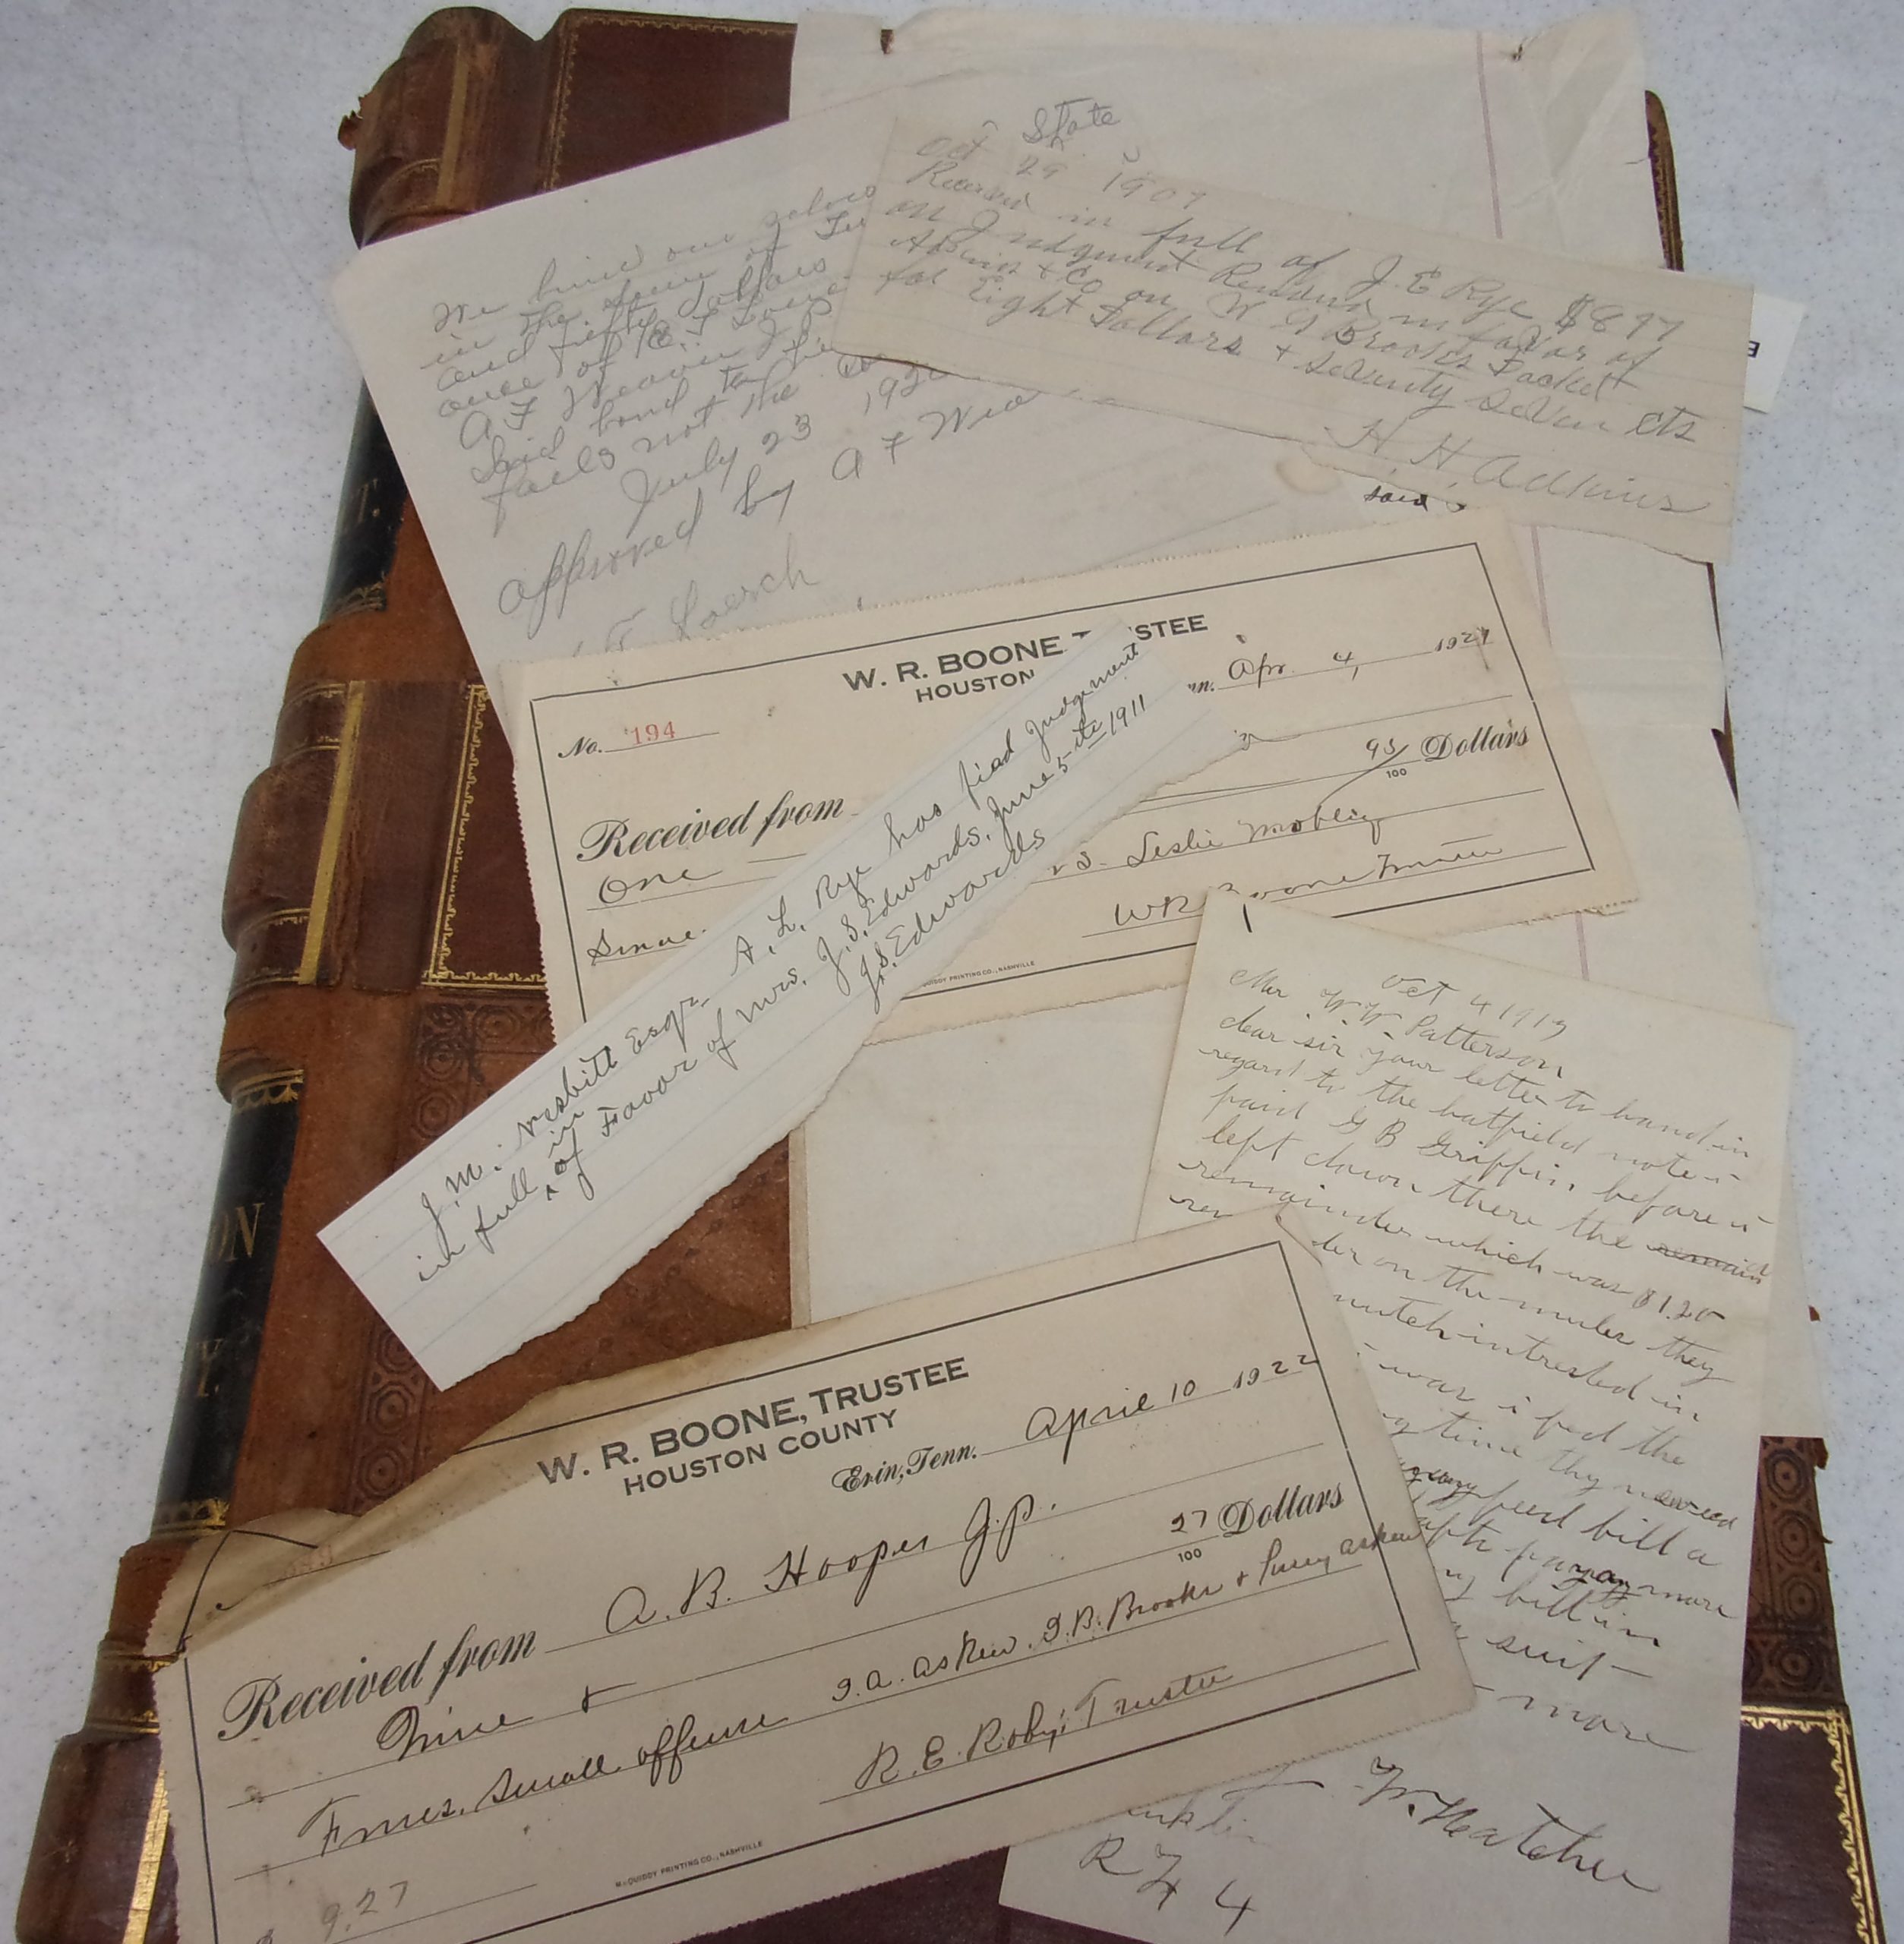 Example of loose records found in a bound book, from the Houston County, Tennessee Archives. Photo courtesy of Melissa Barker